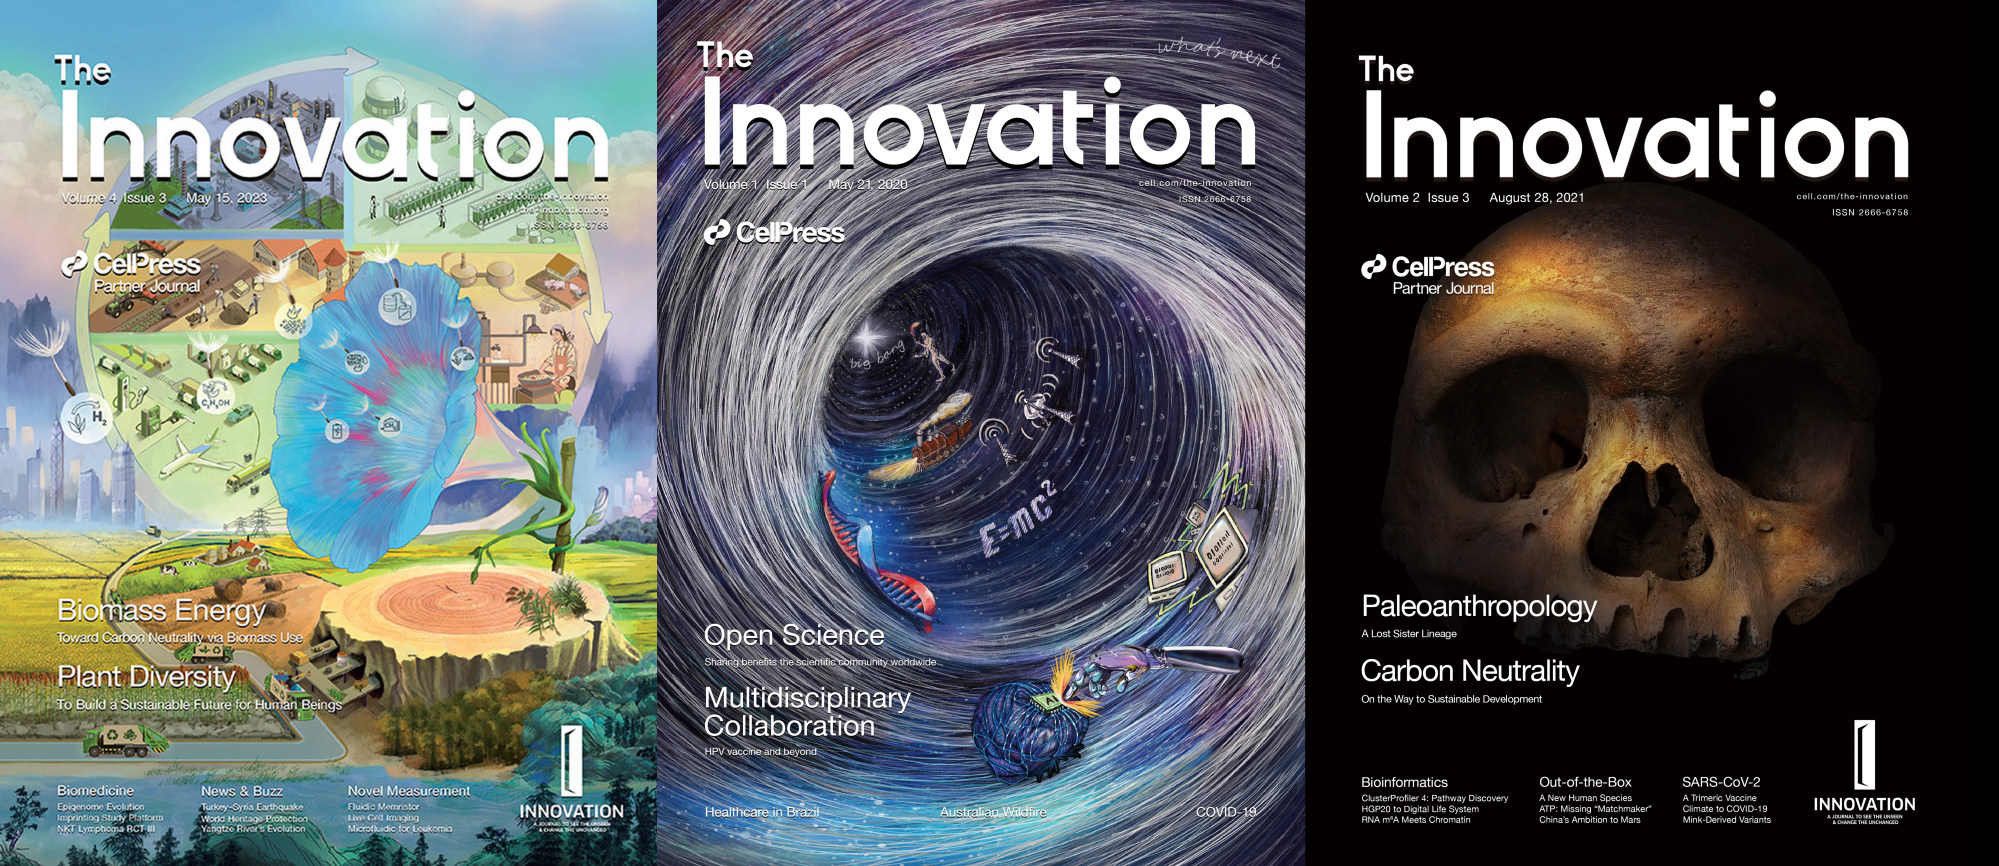 The Innovation’s latest issue (left), alongside its first edition and the “dragon man” paper that made international headlines in 2021. Photo: The Innovation